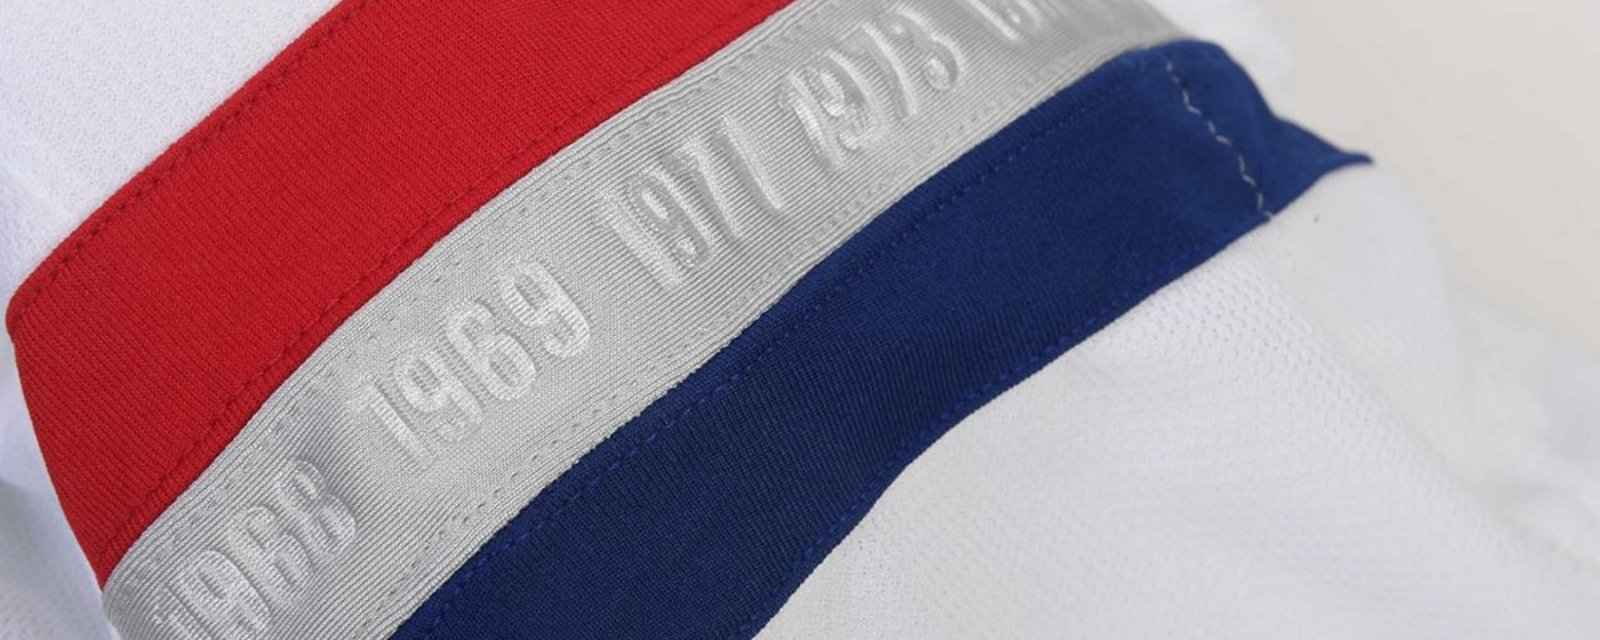 Montreal Canadiens unveil their centennial jersey. 